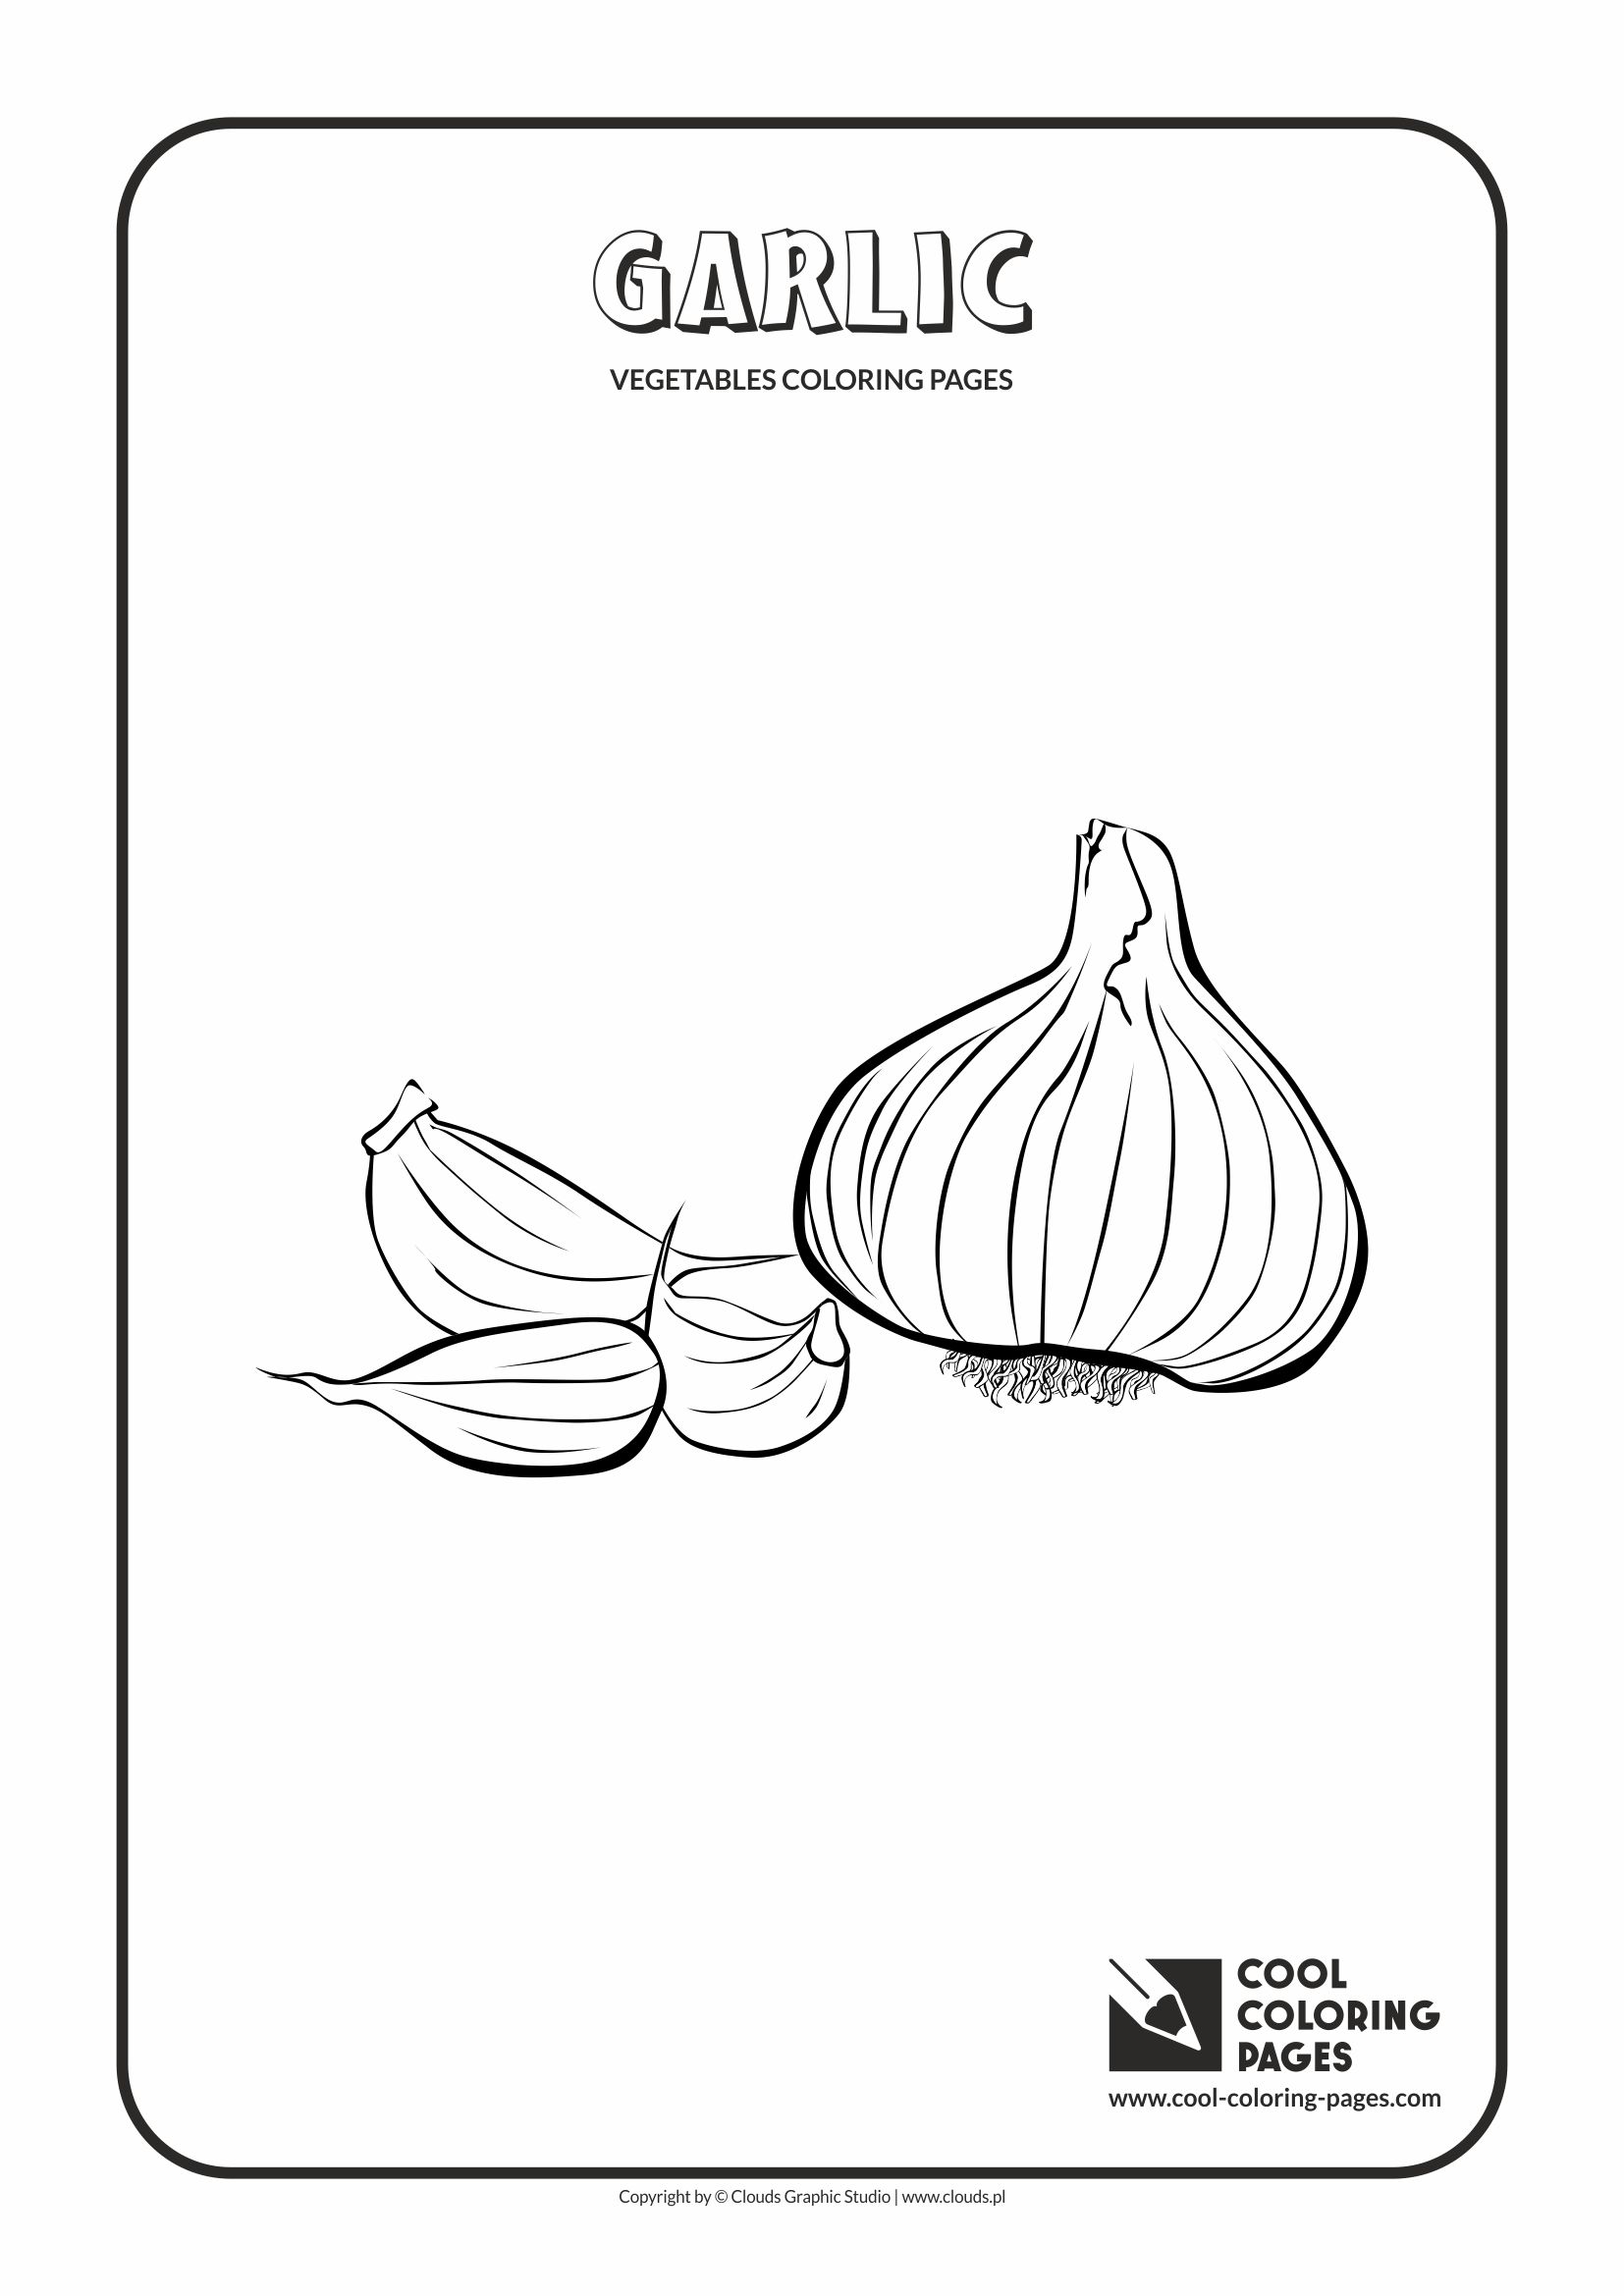 Cool Coloring Pages - Plants / Garlic / Coloring page with garlic